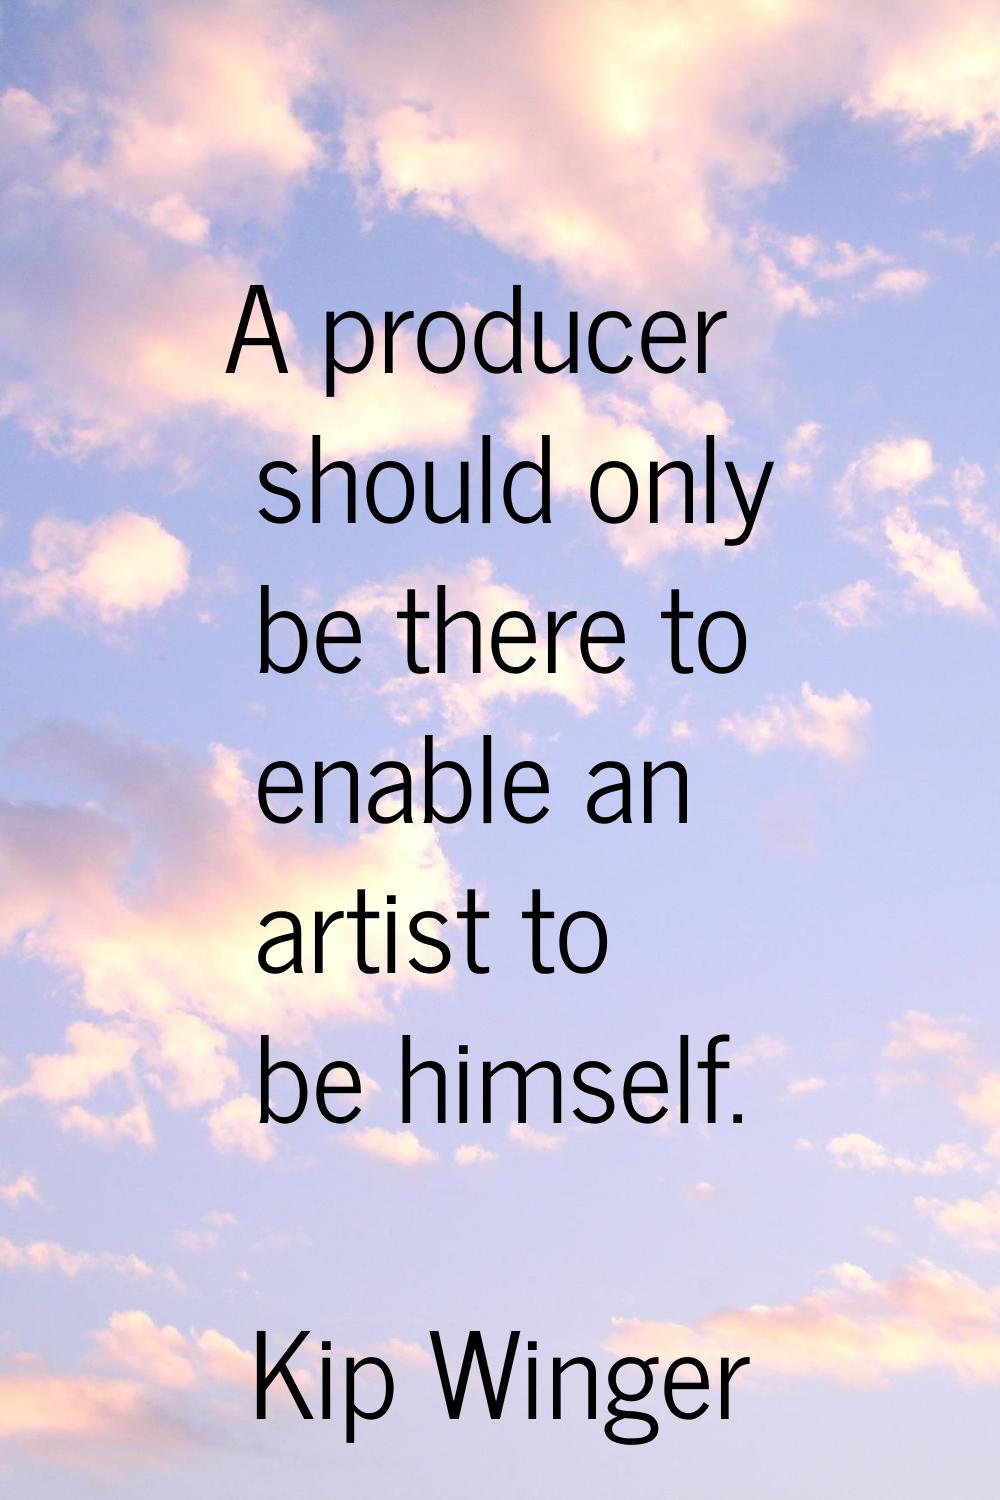 A producer should only be there to enable an artist to be himself.